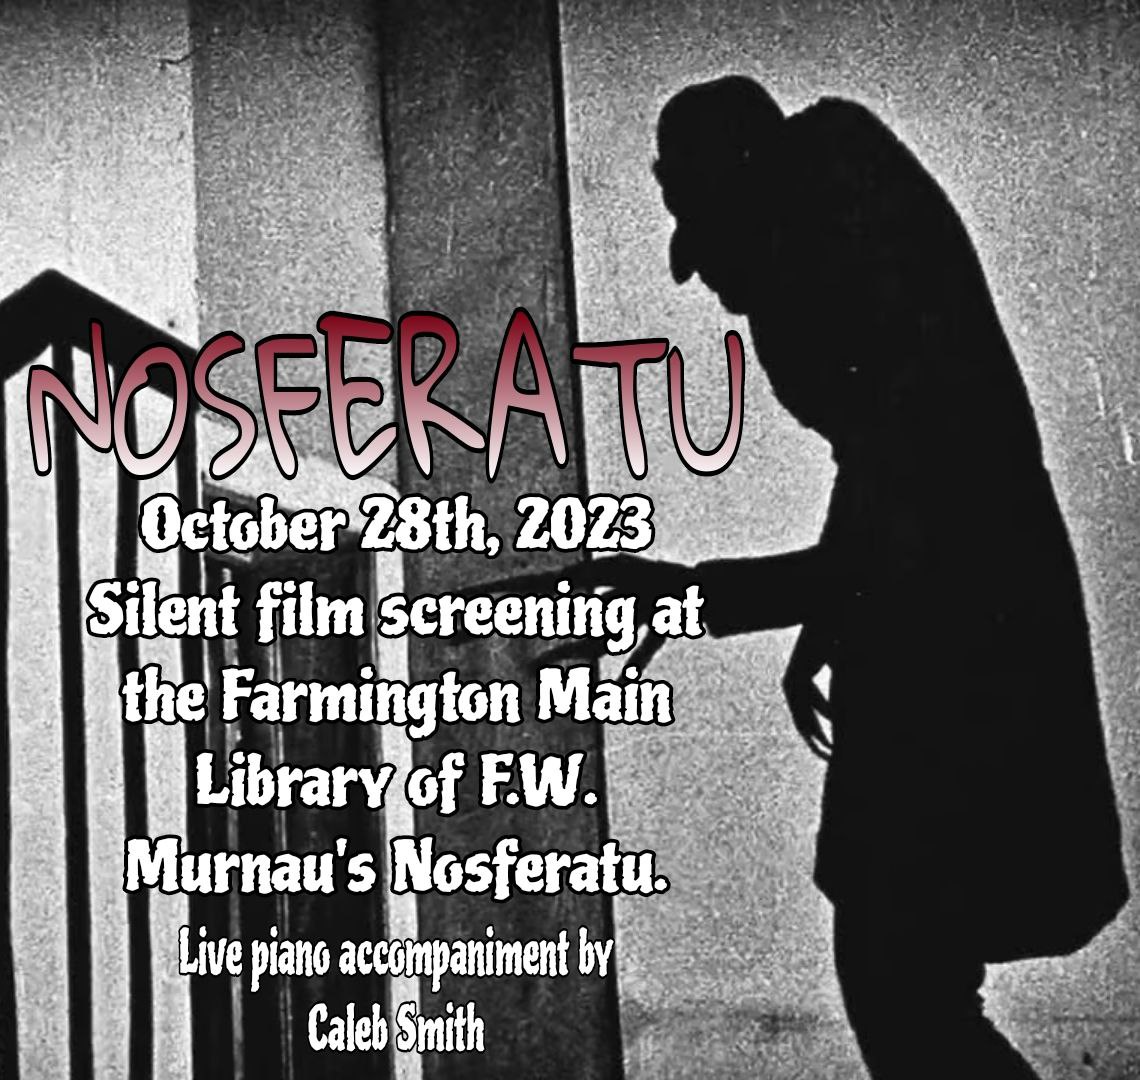 a black and white image background of the silhouette of Nosferatu with text that reads Nosferatu, October 28th, 2023. Silent Film Screening at the Farmington Main Library of F.W. Murnau's Nosferatu. Live piano accompaniment by Caleb Smith